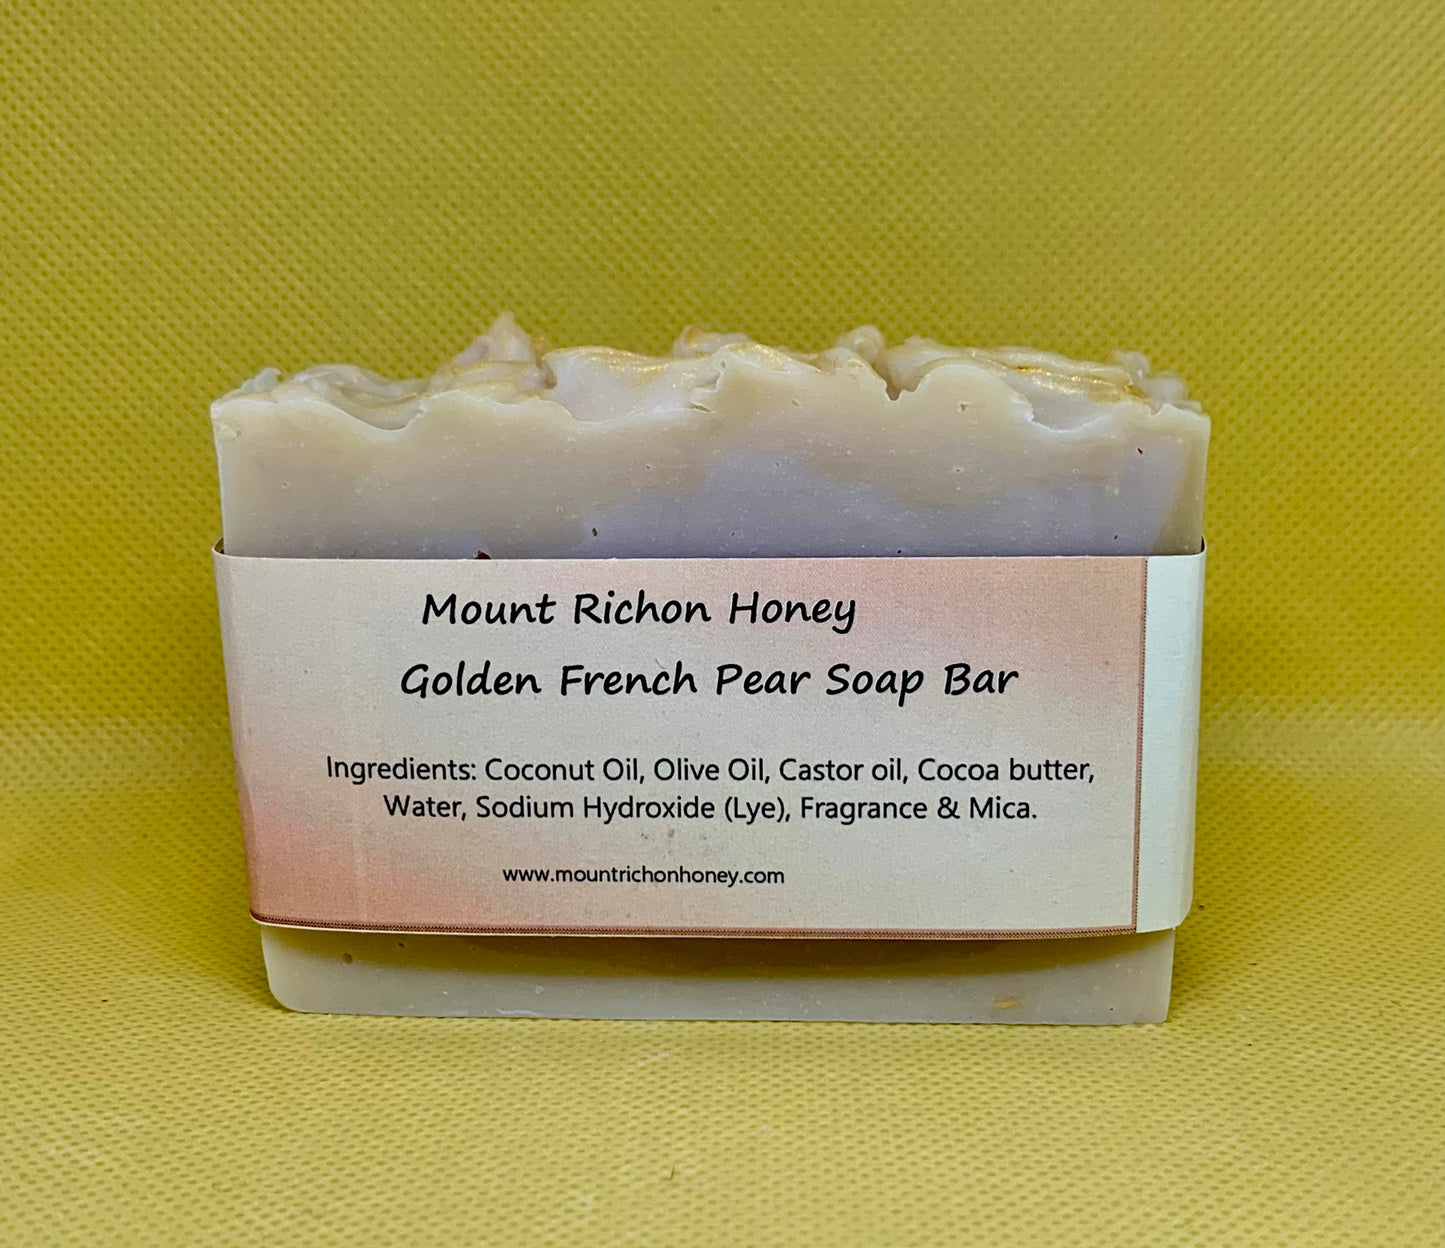 Golden French Pear Soap Bar